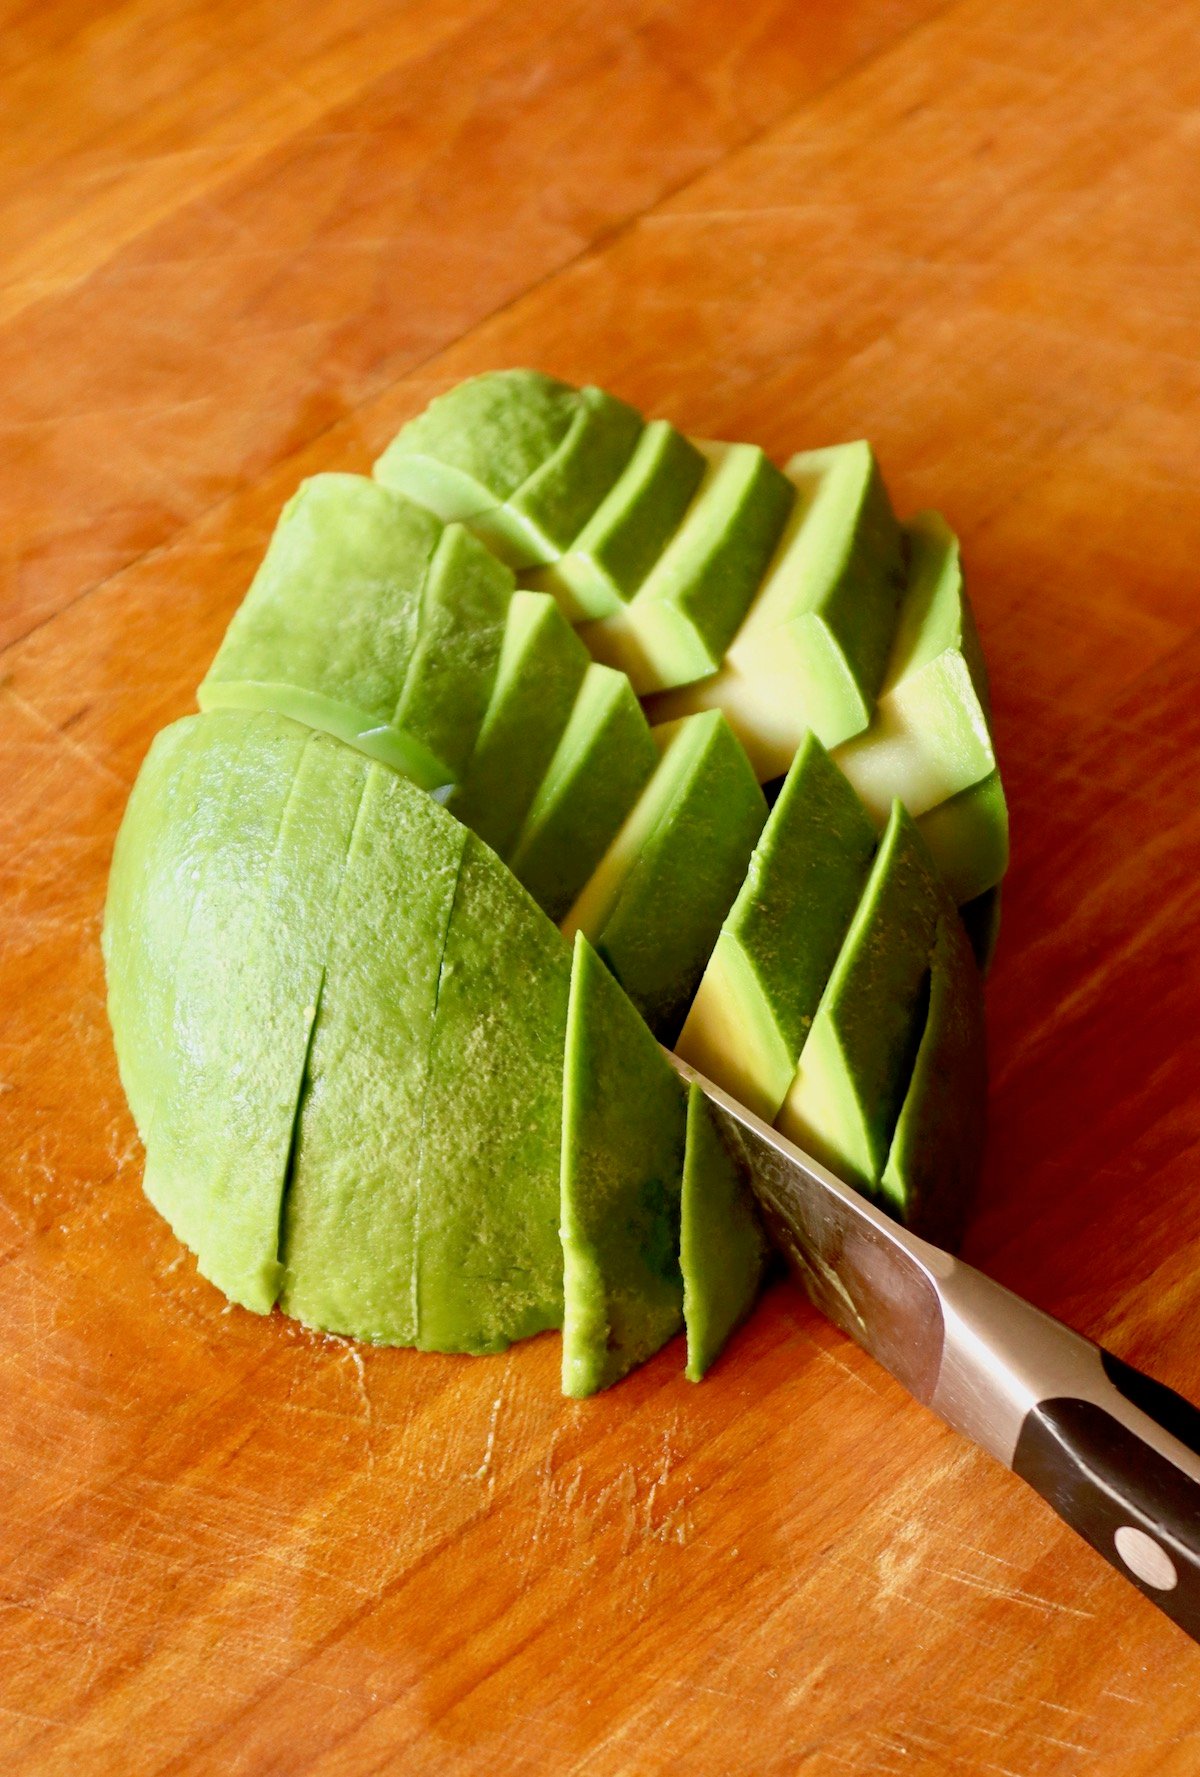 Peeled avocado, round side up on a wooden cutting board, being cut into a large dice.